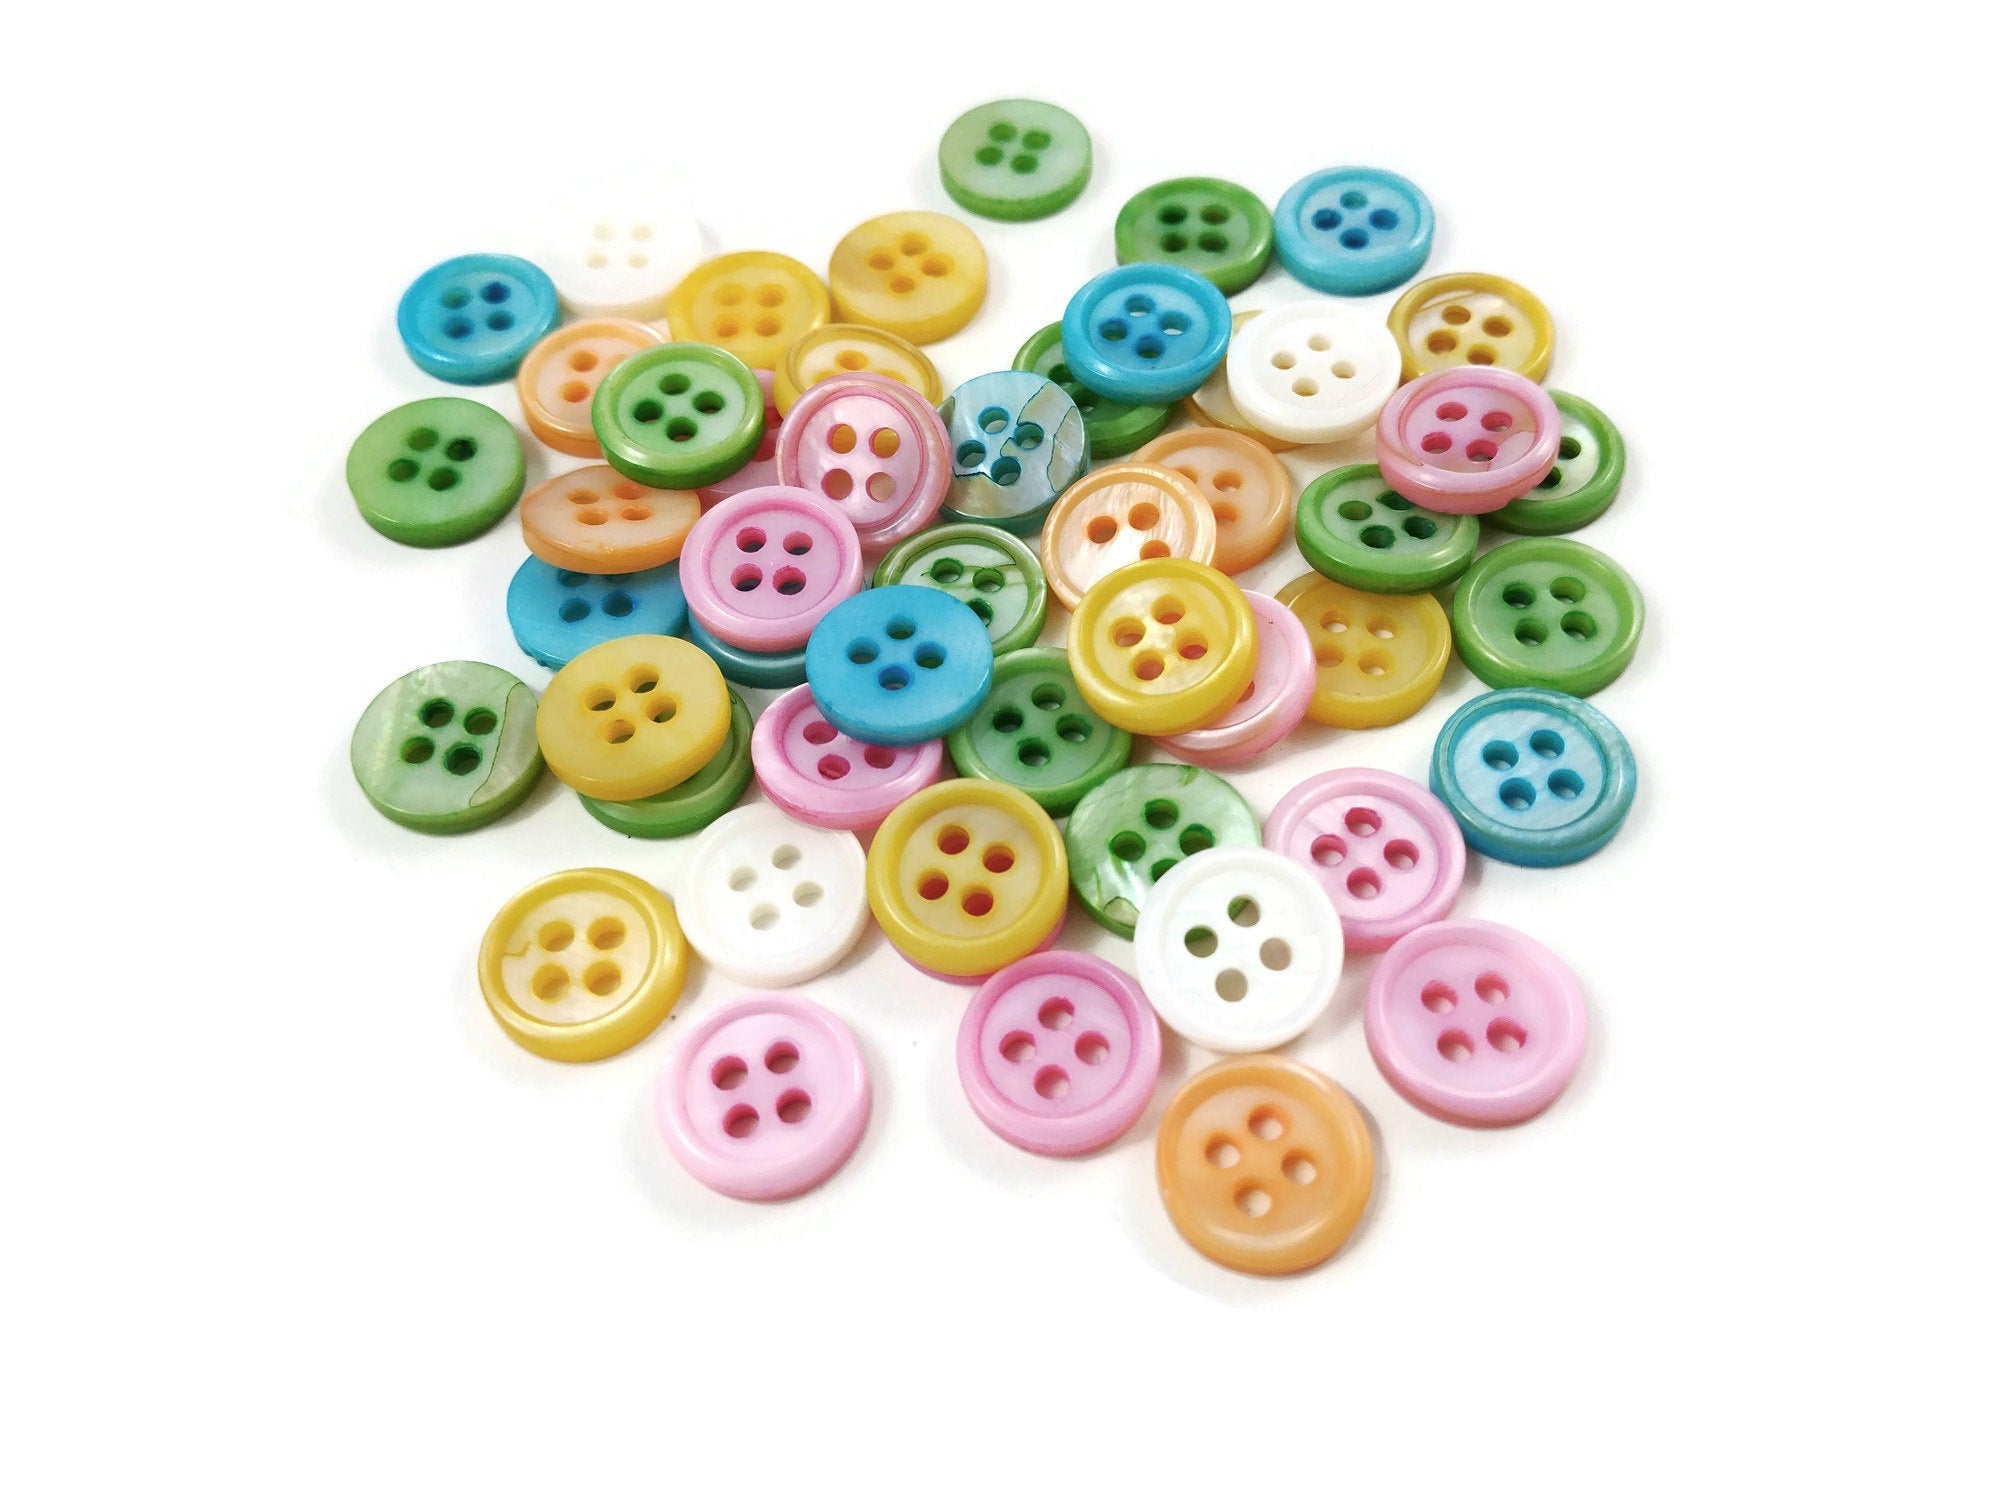 Small Yellow Button Yellow Buttons Sewing Buttons 3/8 10mm Sewing Button 2  Hole Sewing Buttons 